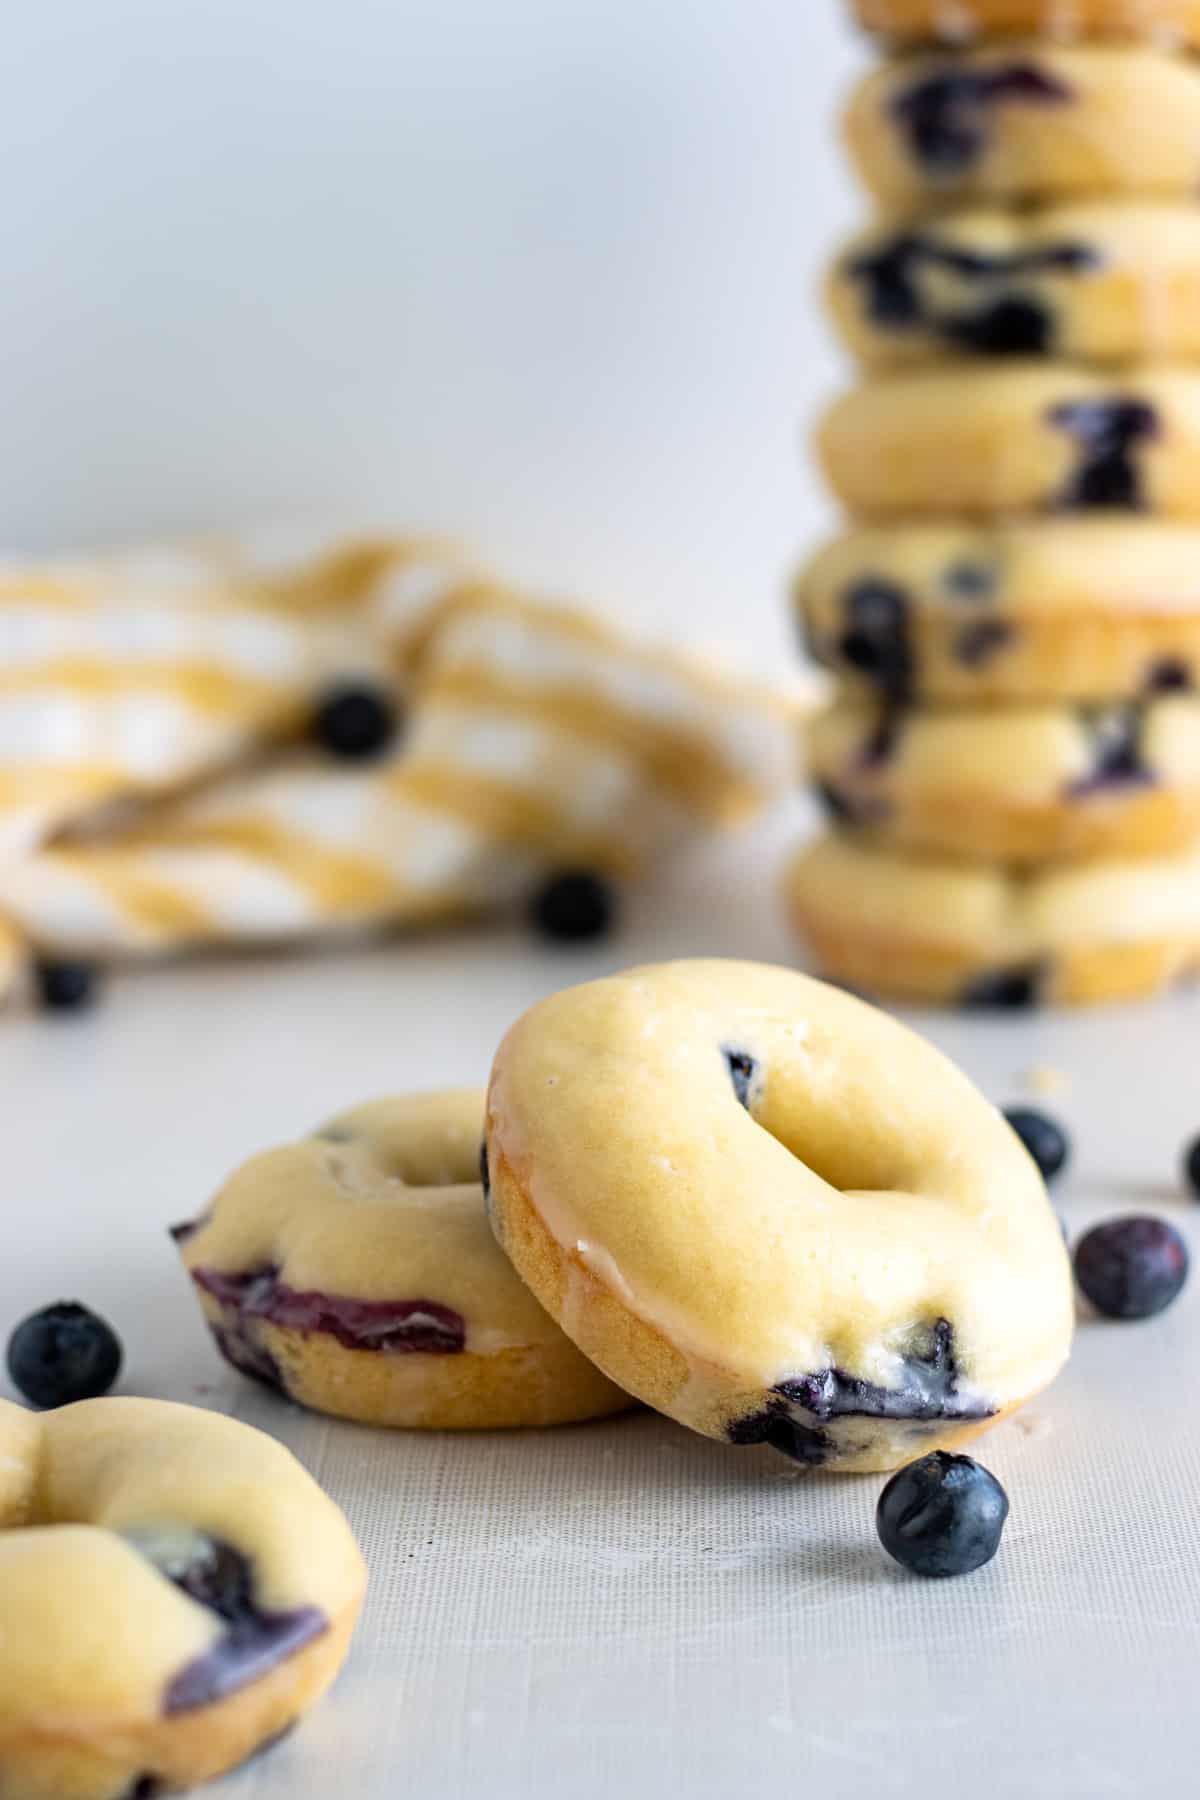 Glazed blueberry donuts and blueberries on a table with a stack of donuts and a yellow towel in the background.